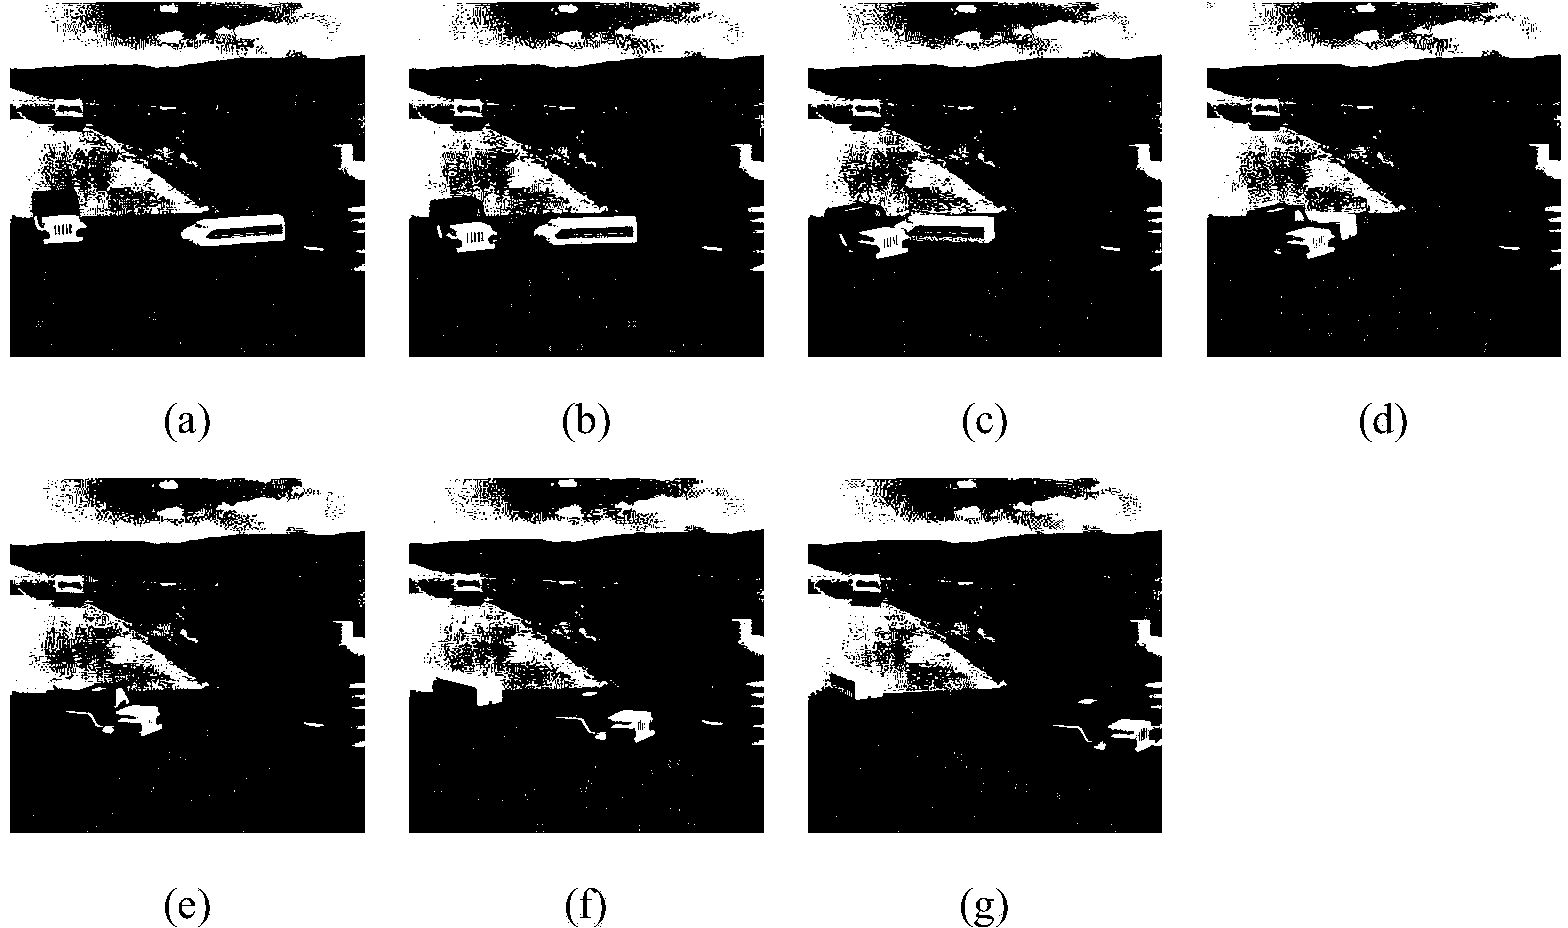 Method for detecting salient regions in sequence images based on improved visual attention model